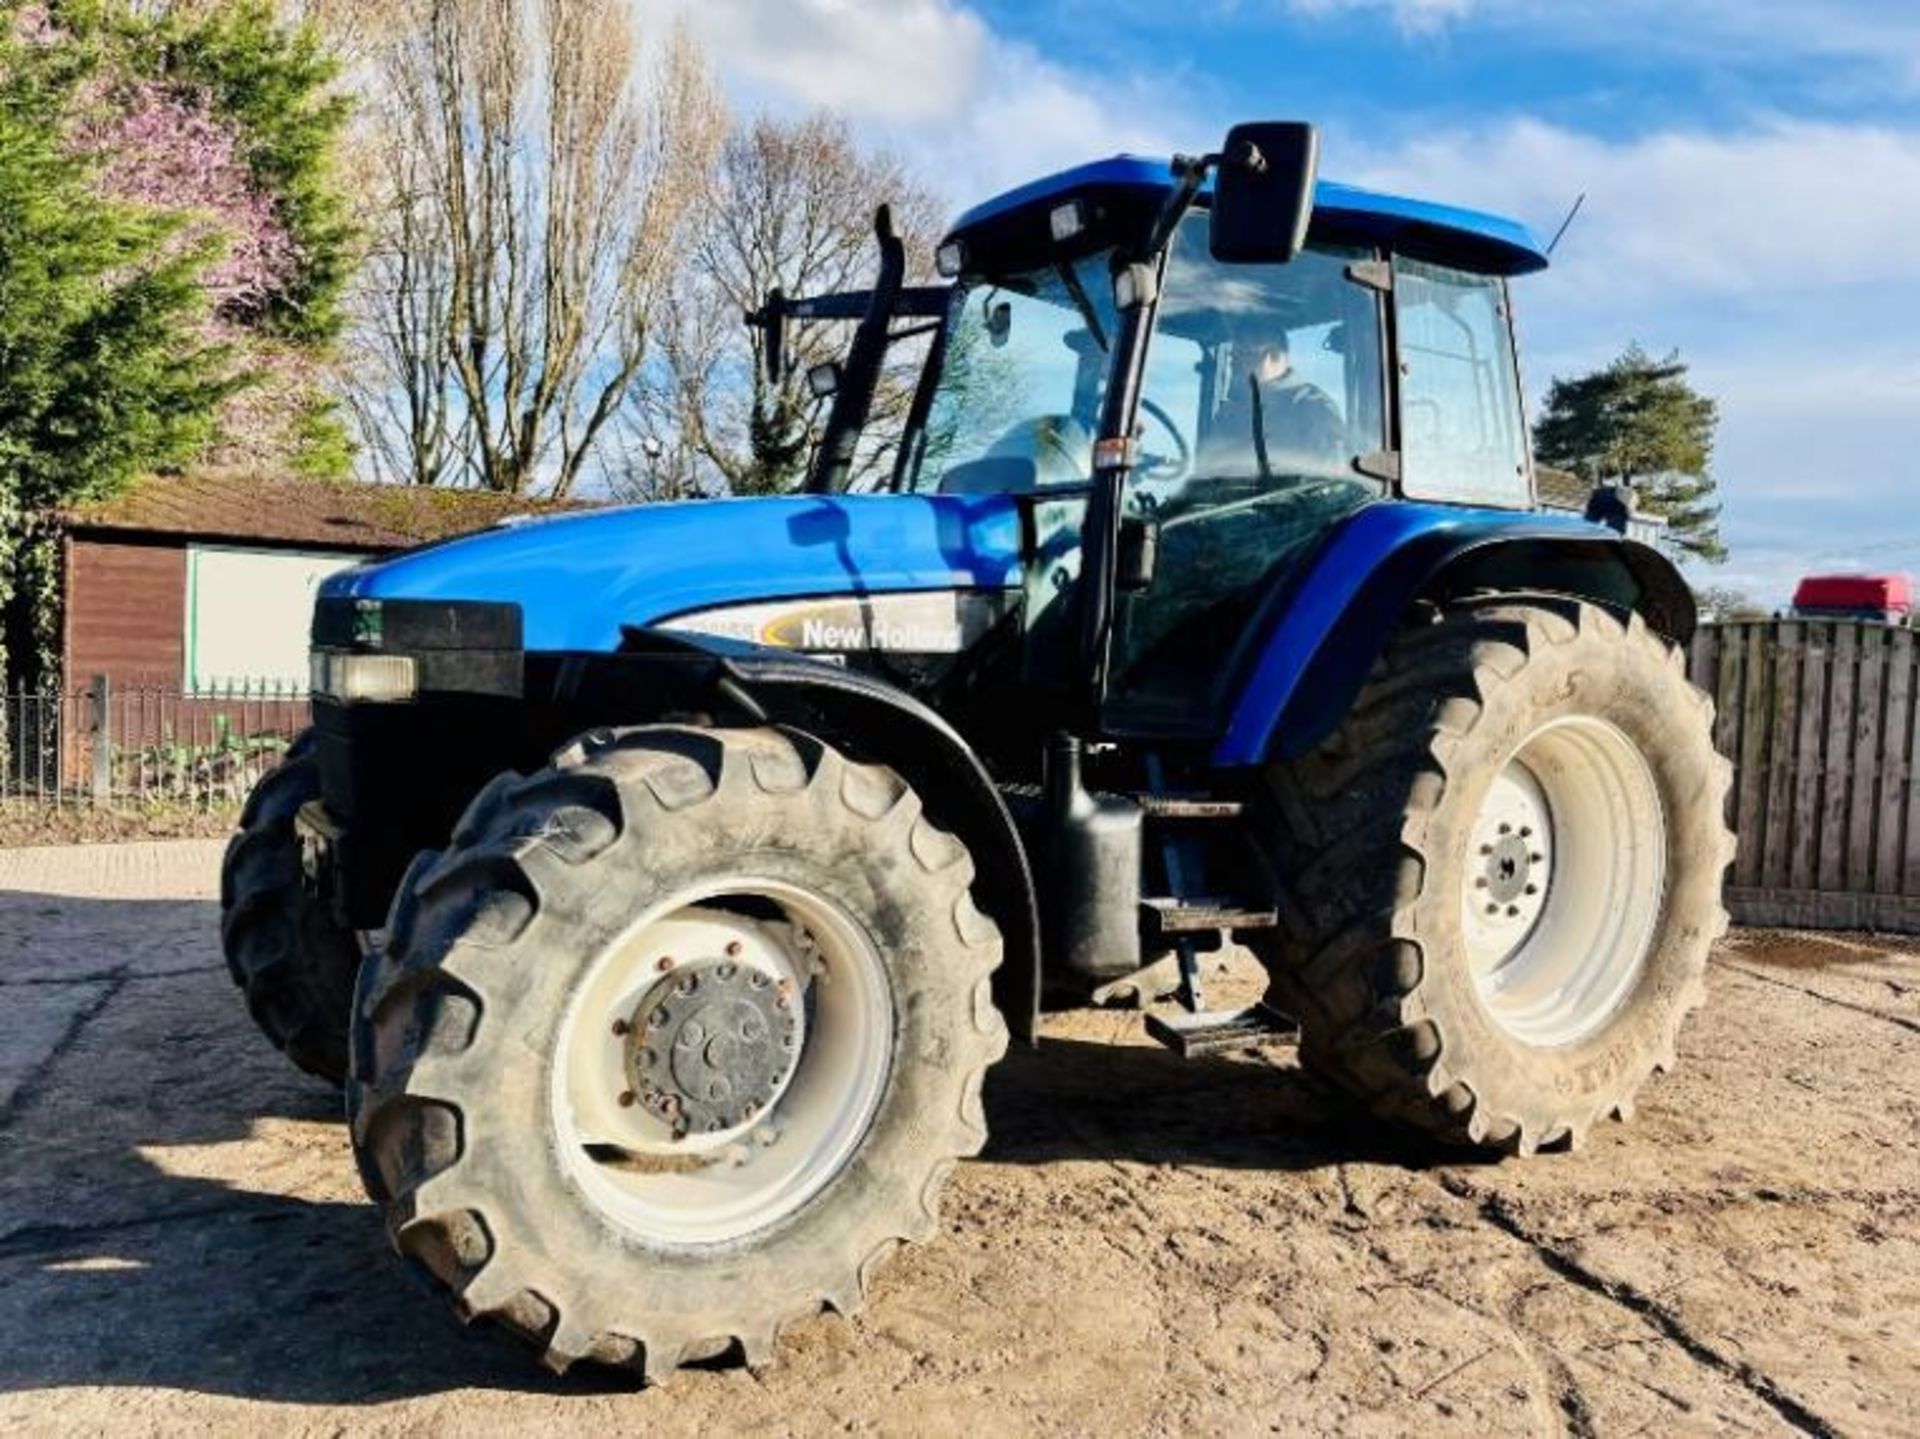 NEW HOLLAND TM155 4WD TRACTOR *5619 HOURS* C/W RANGE COMMAND GEAR BOX - Image 16 of 19